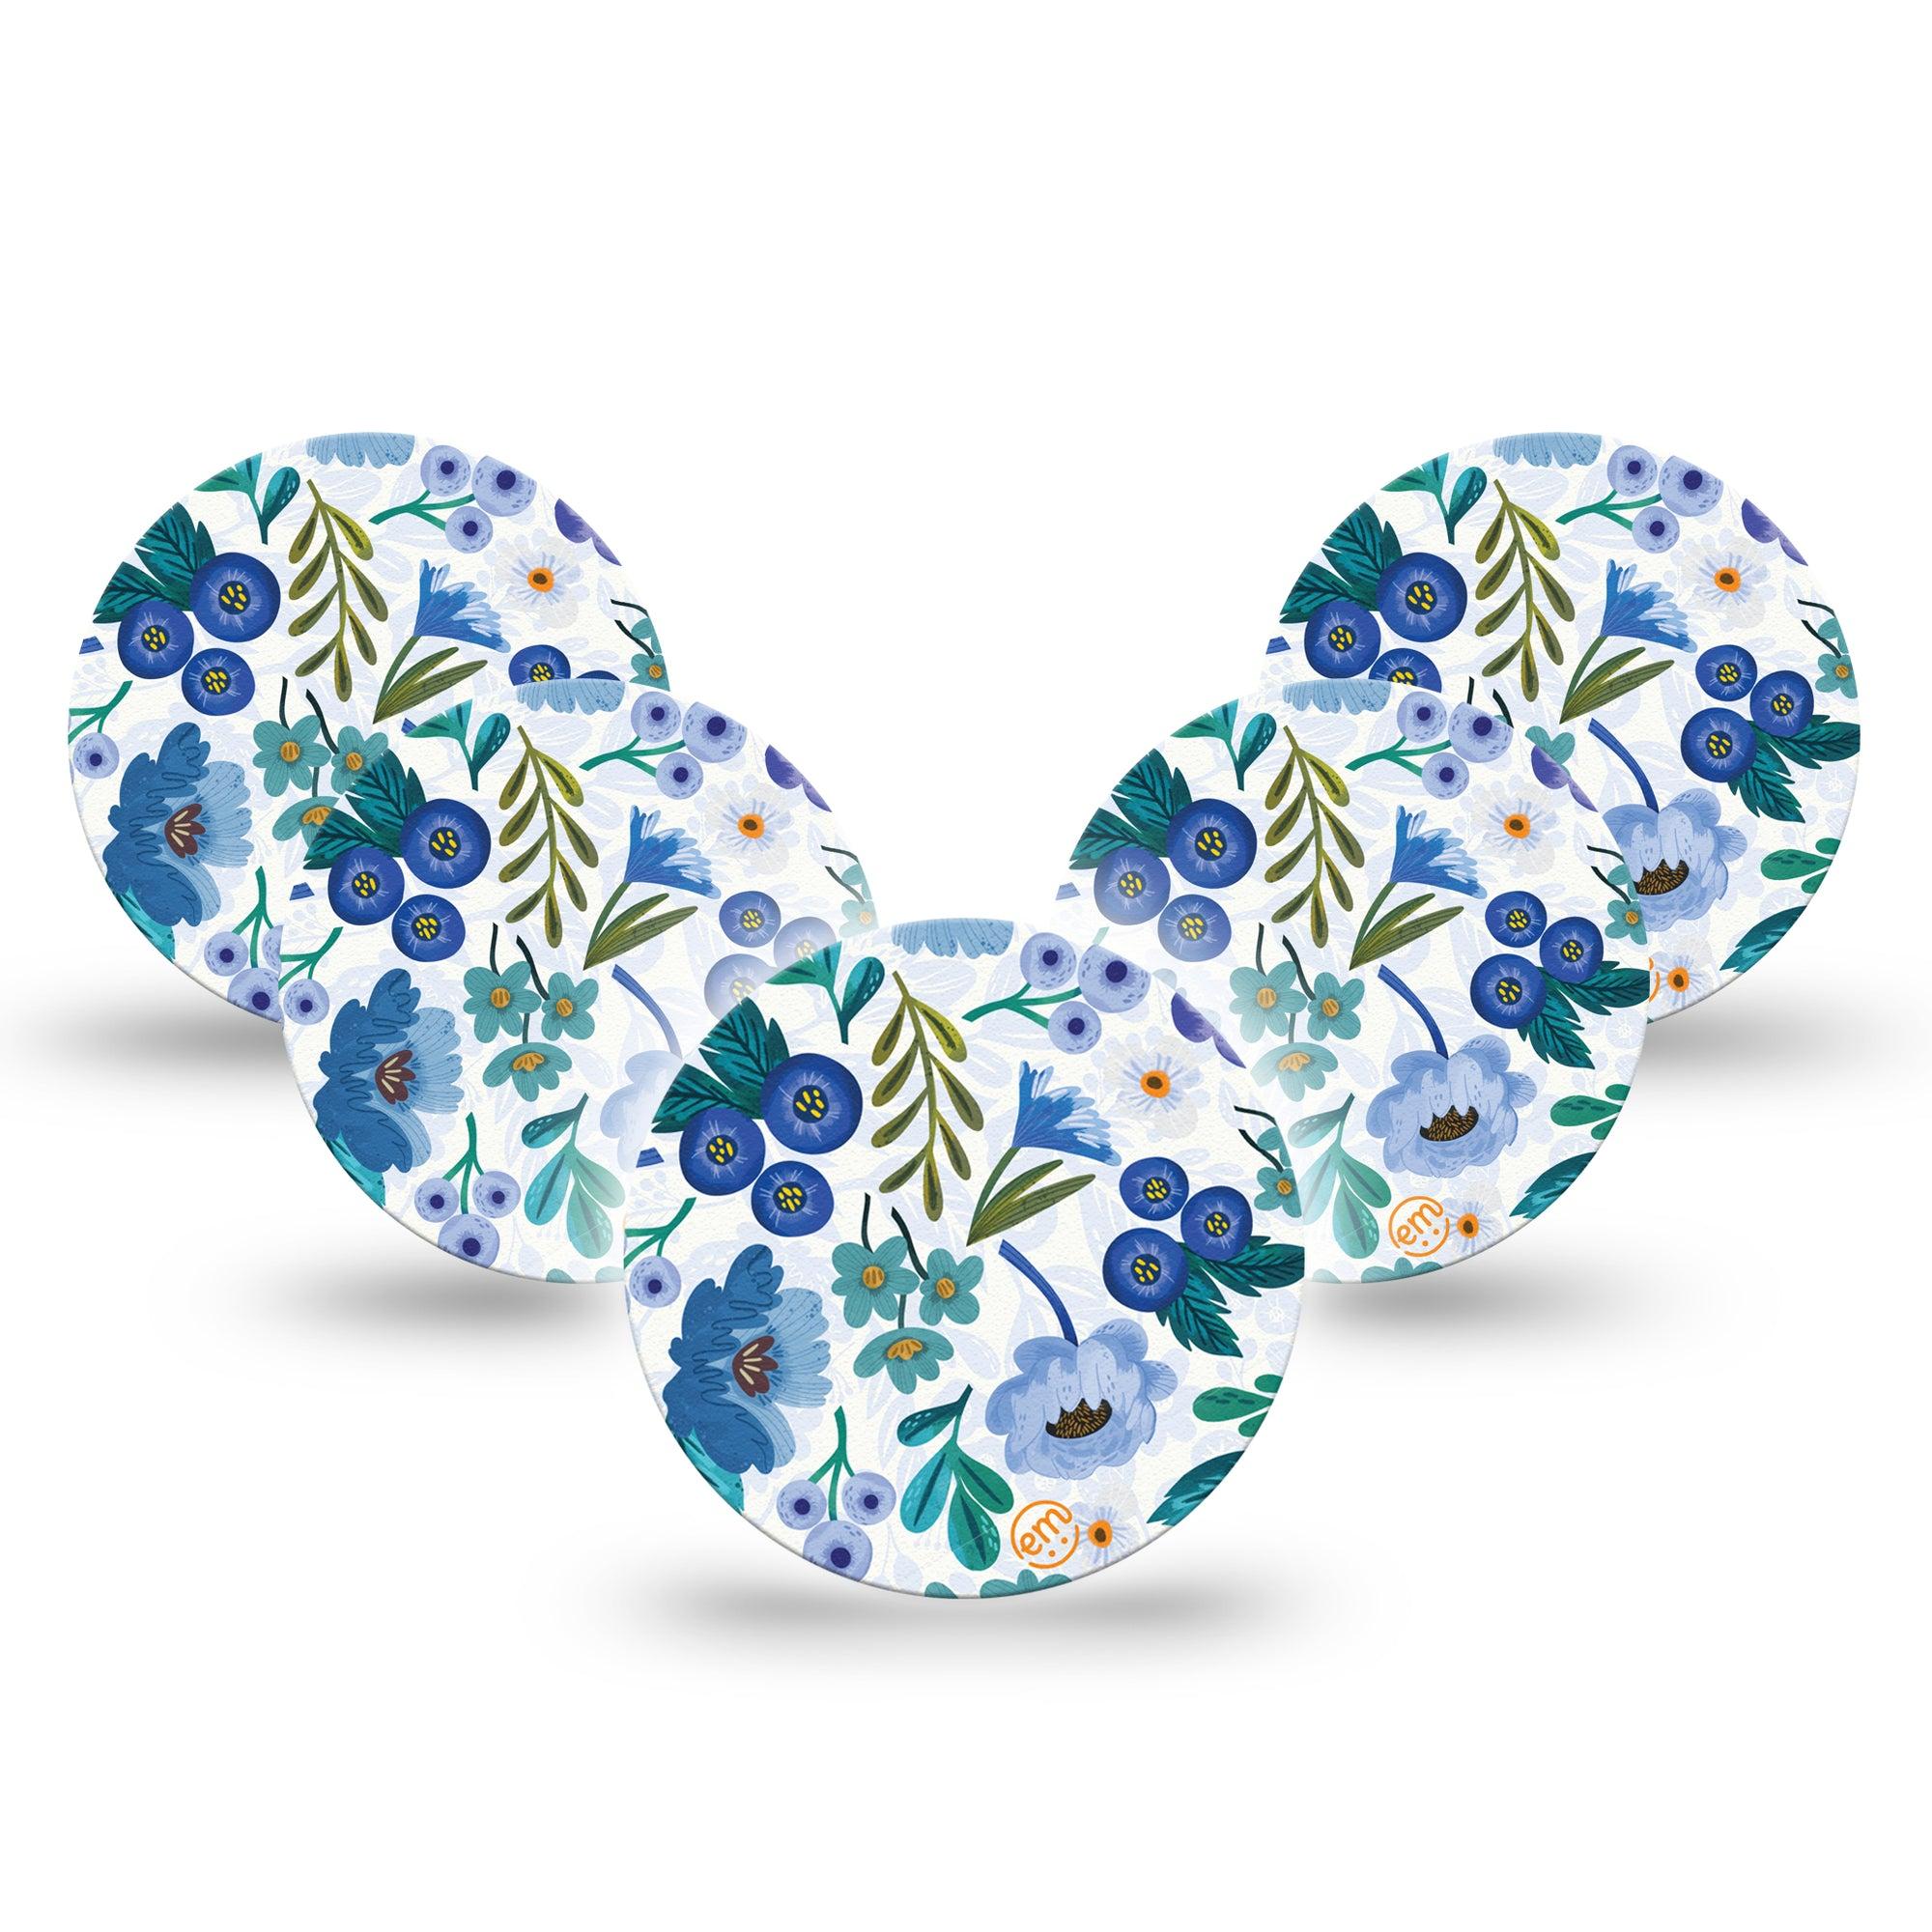 ExpressionMed Blue Anemone Libre 3 Overpatch, 5-Pack, Plucked Azure Florals Inspired, Overlay Tape Design